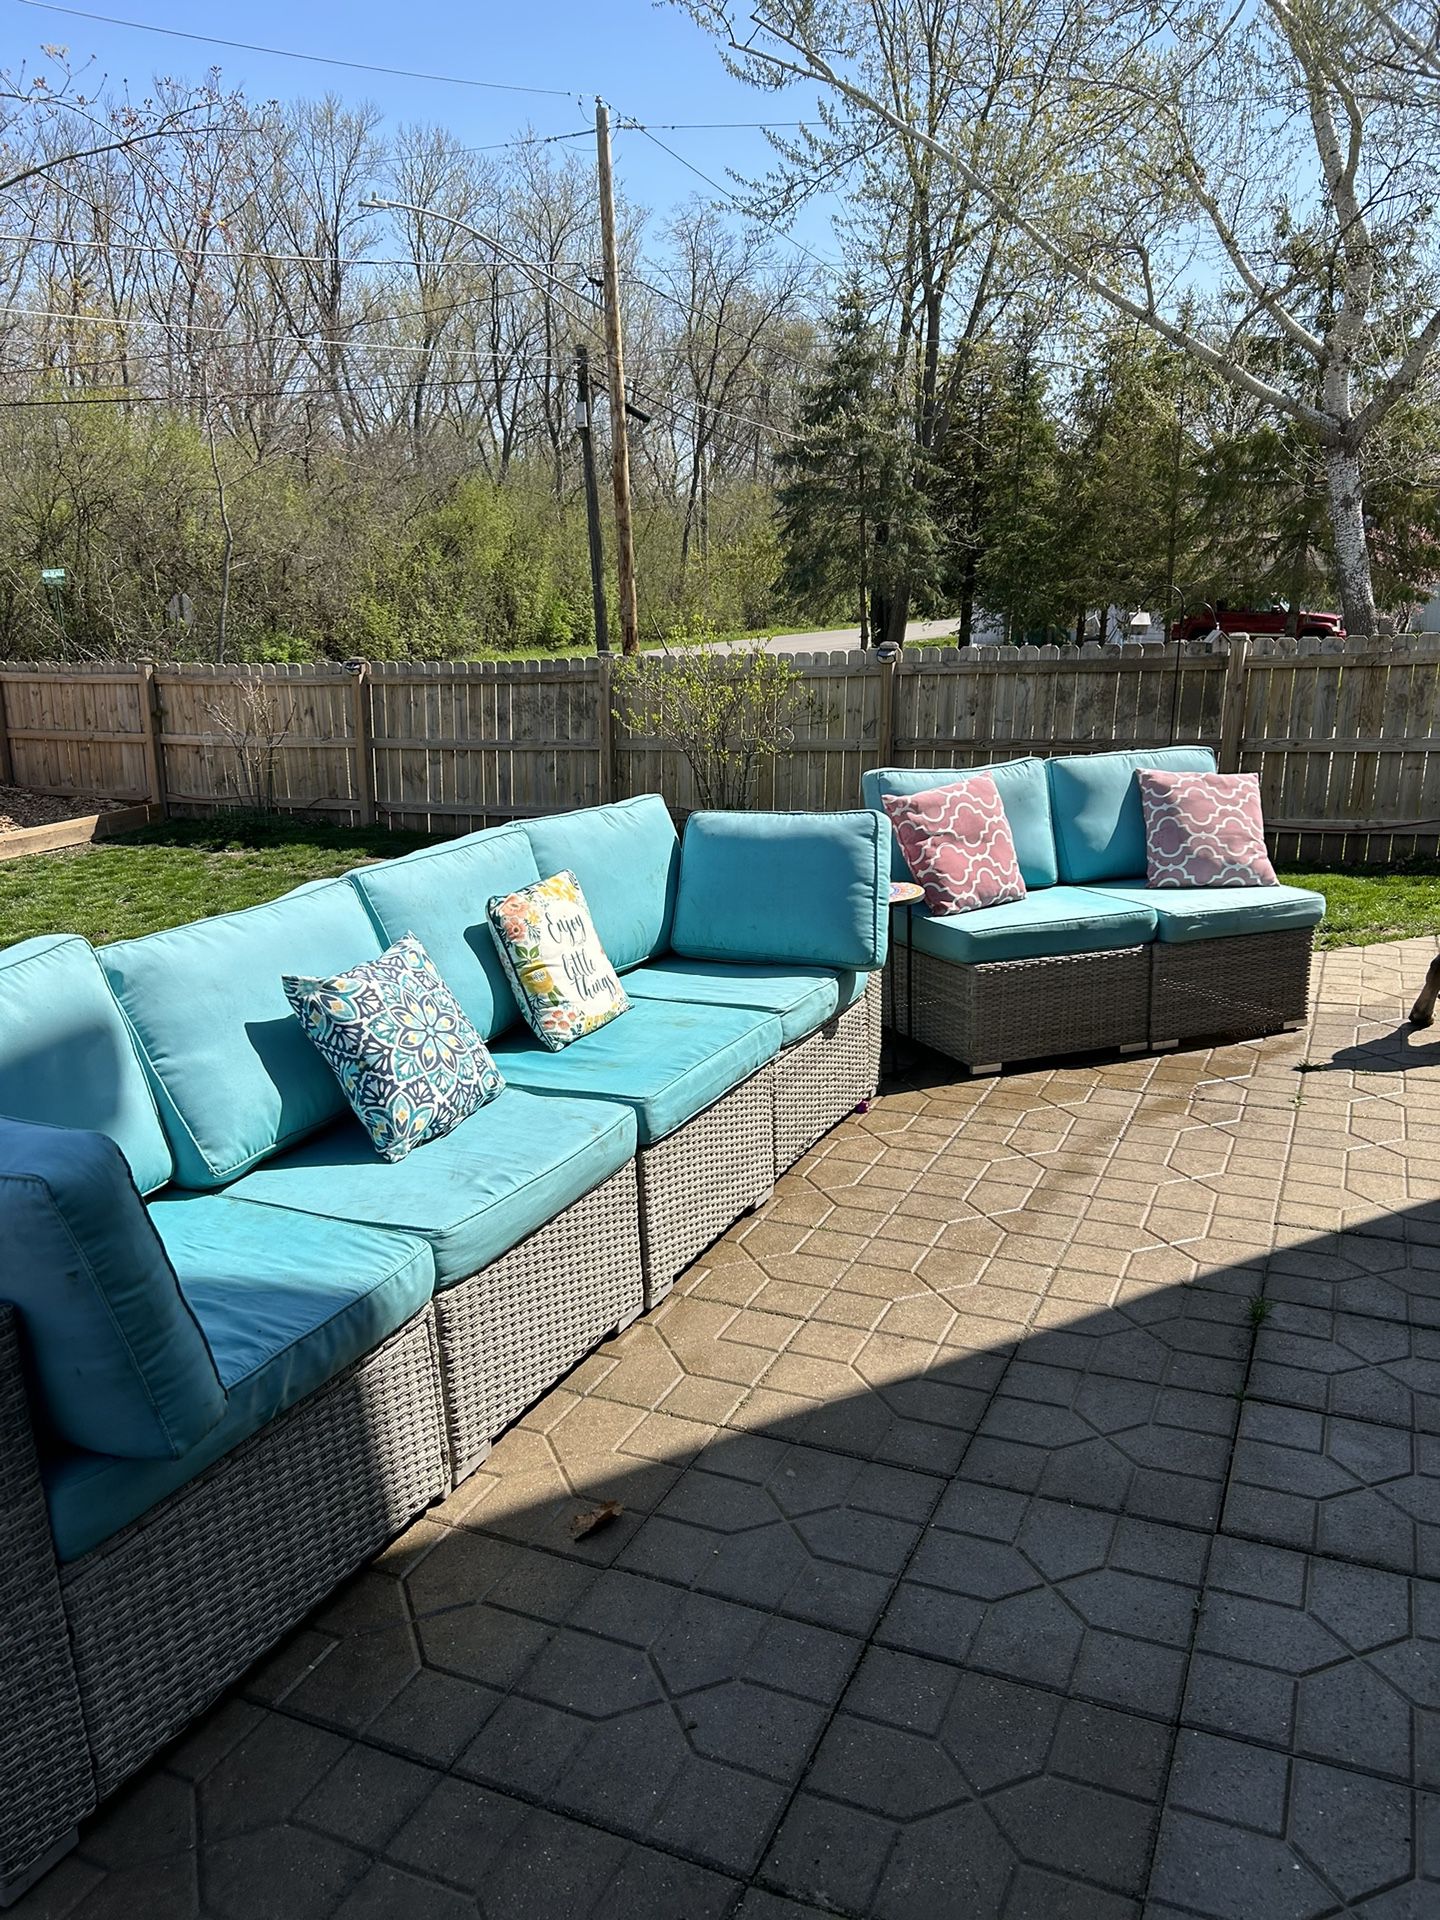 7 Piece Sectional Outdoor Patio Furniture Set